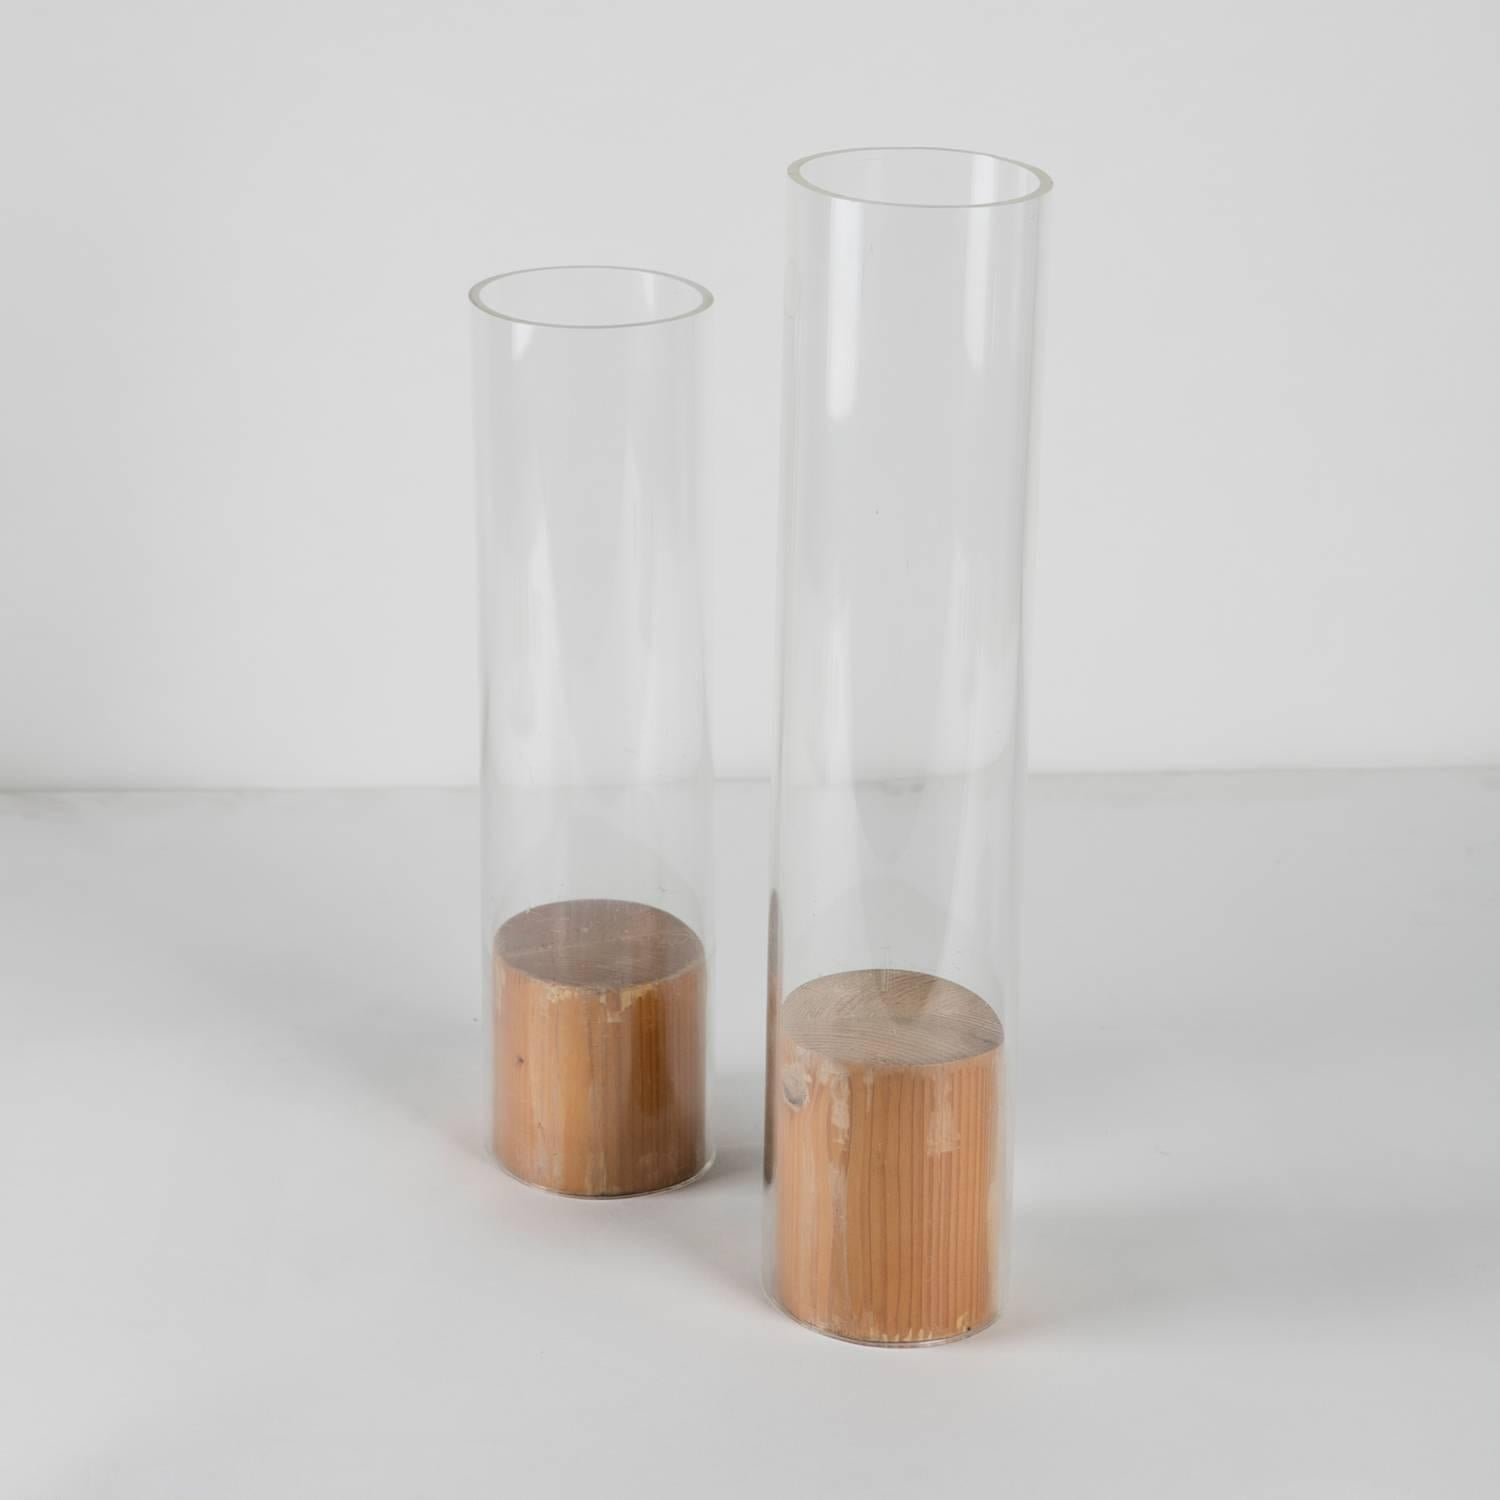 Italian Set of Two One-Off Wood and Plexiglass Vases by Carla Venosta, Italy, 1970s For Sale